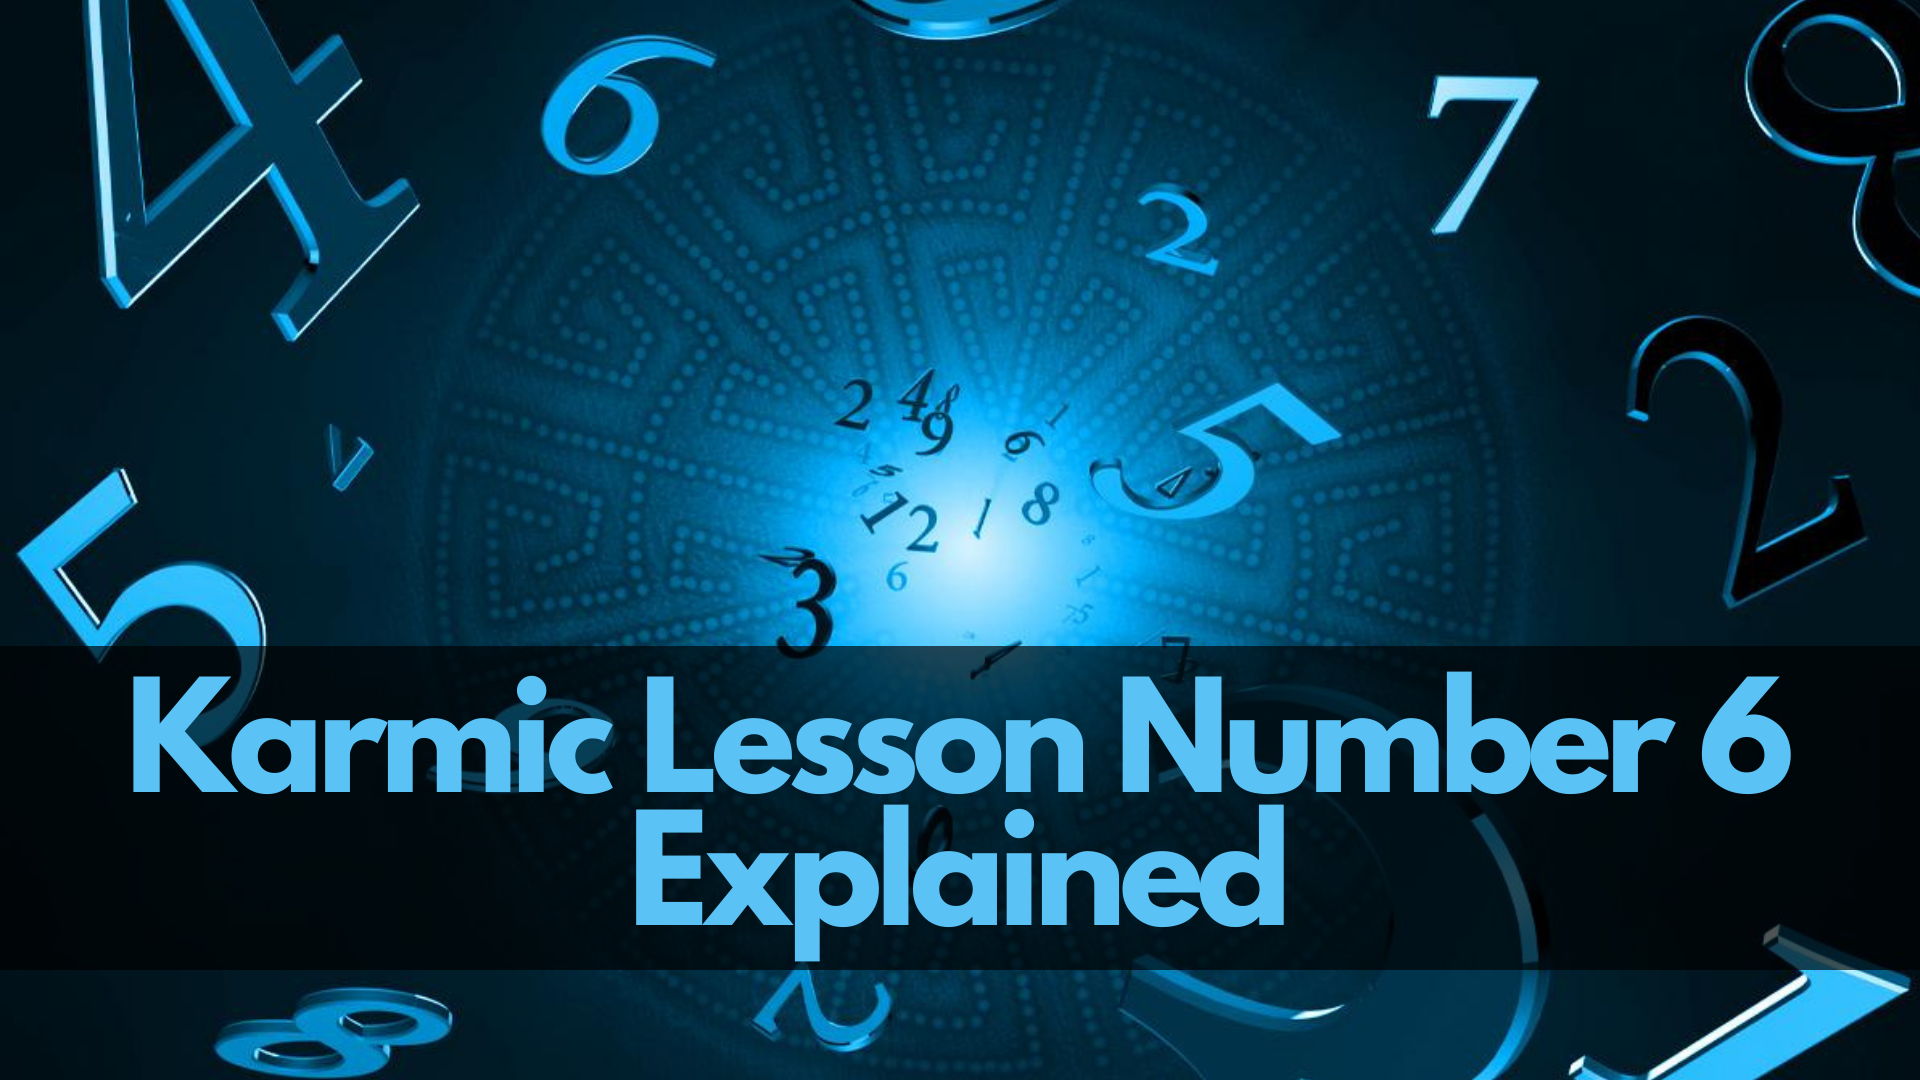 Different numbers floating on the background with words Karmic Lesson Number 6 Explained